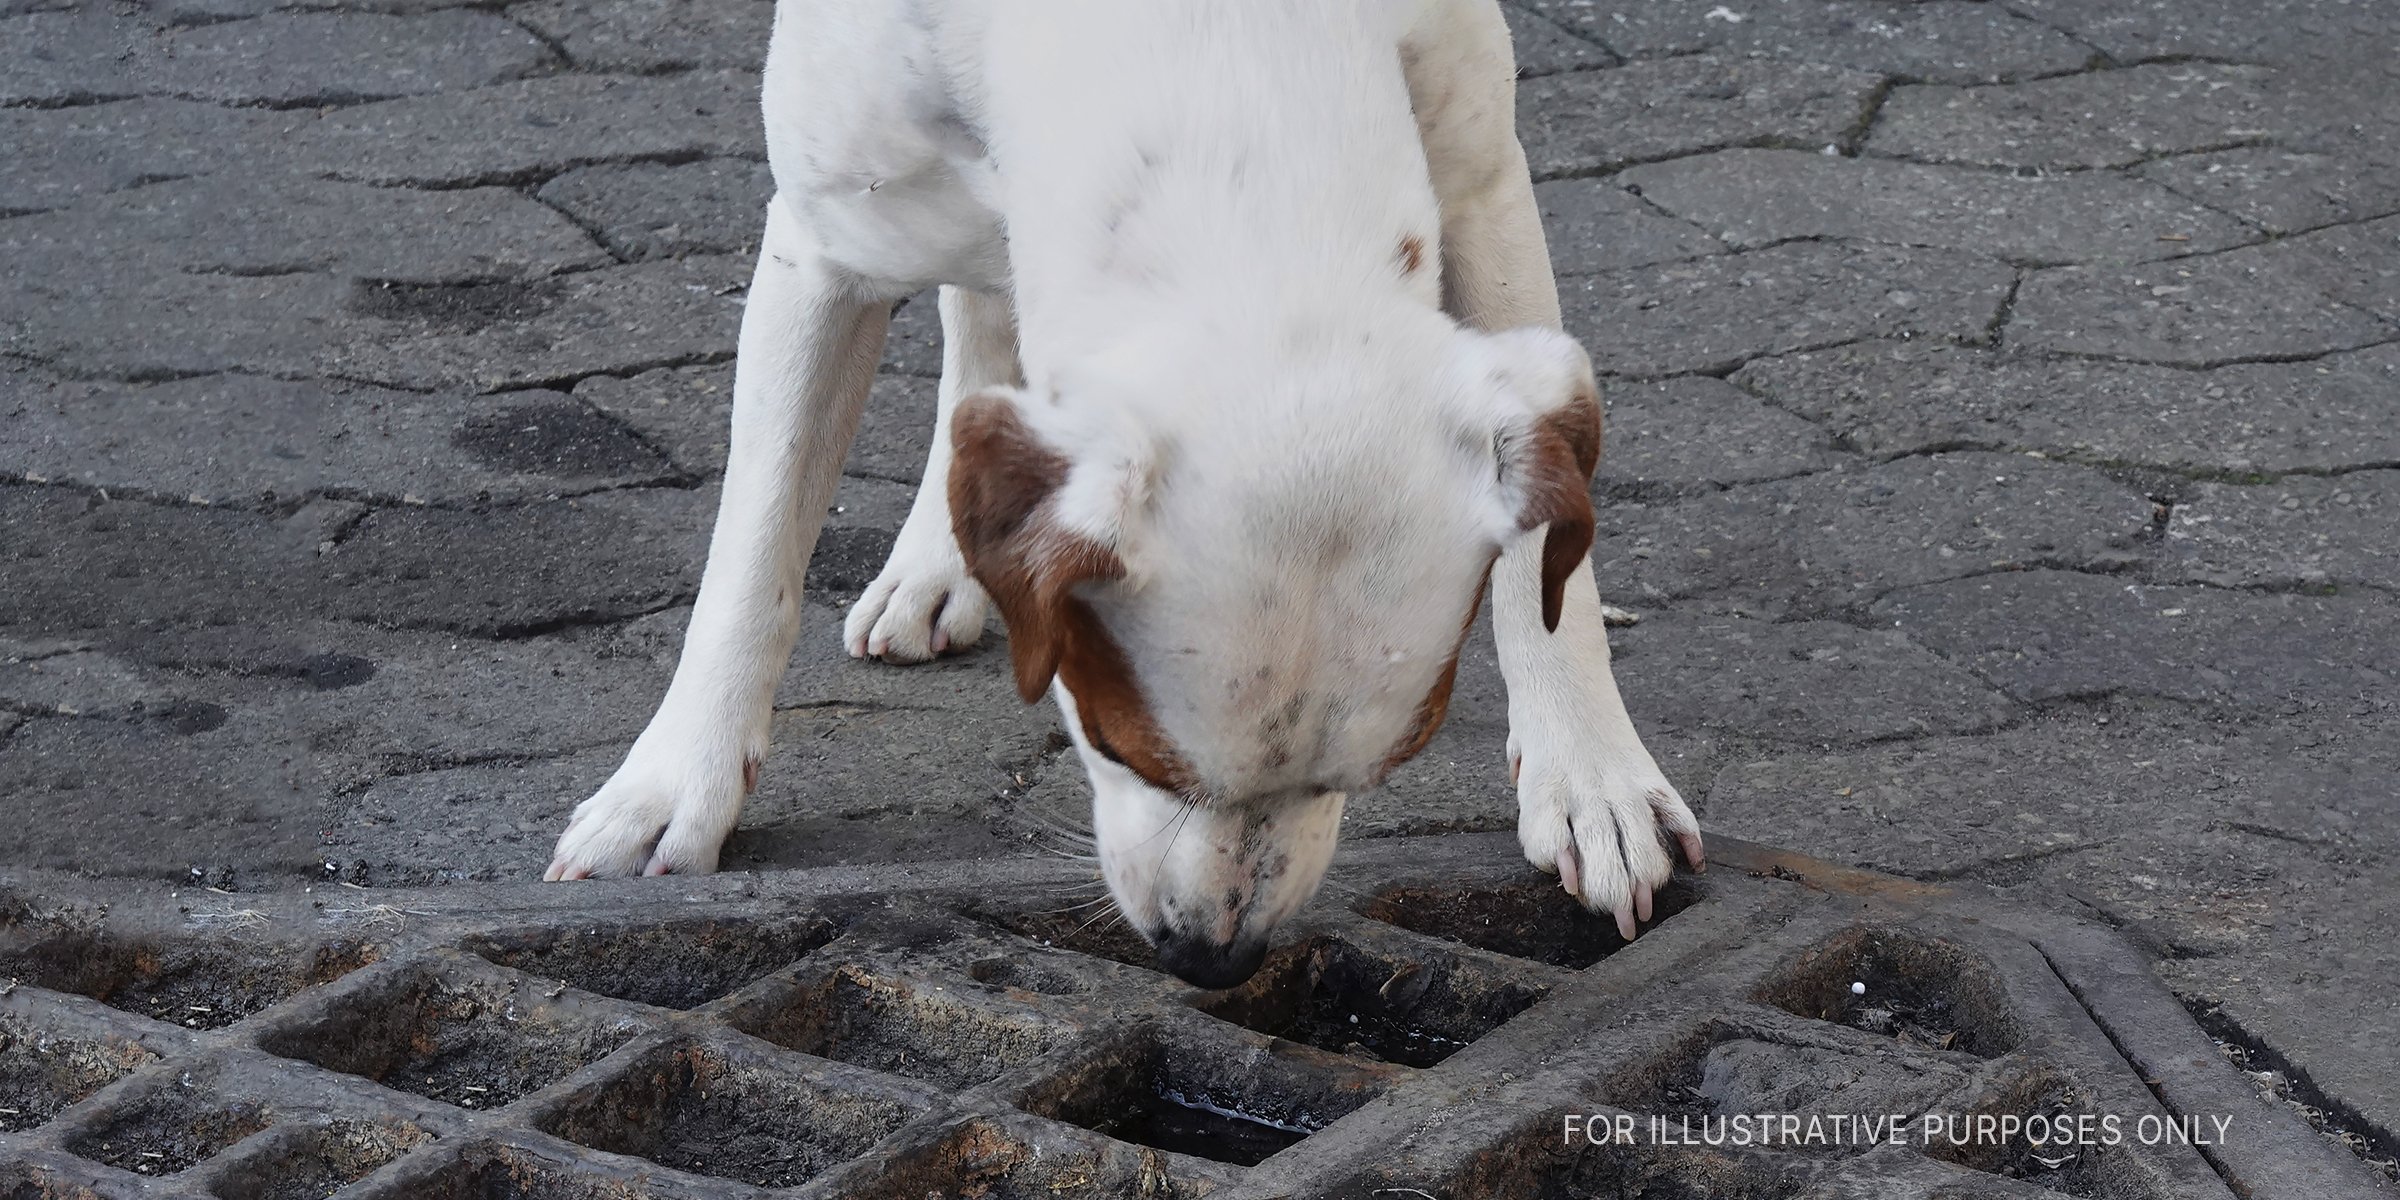 Dog looking through a sewer. | Source: Getty Images